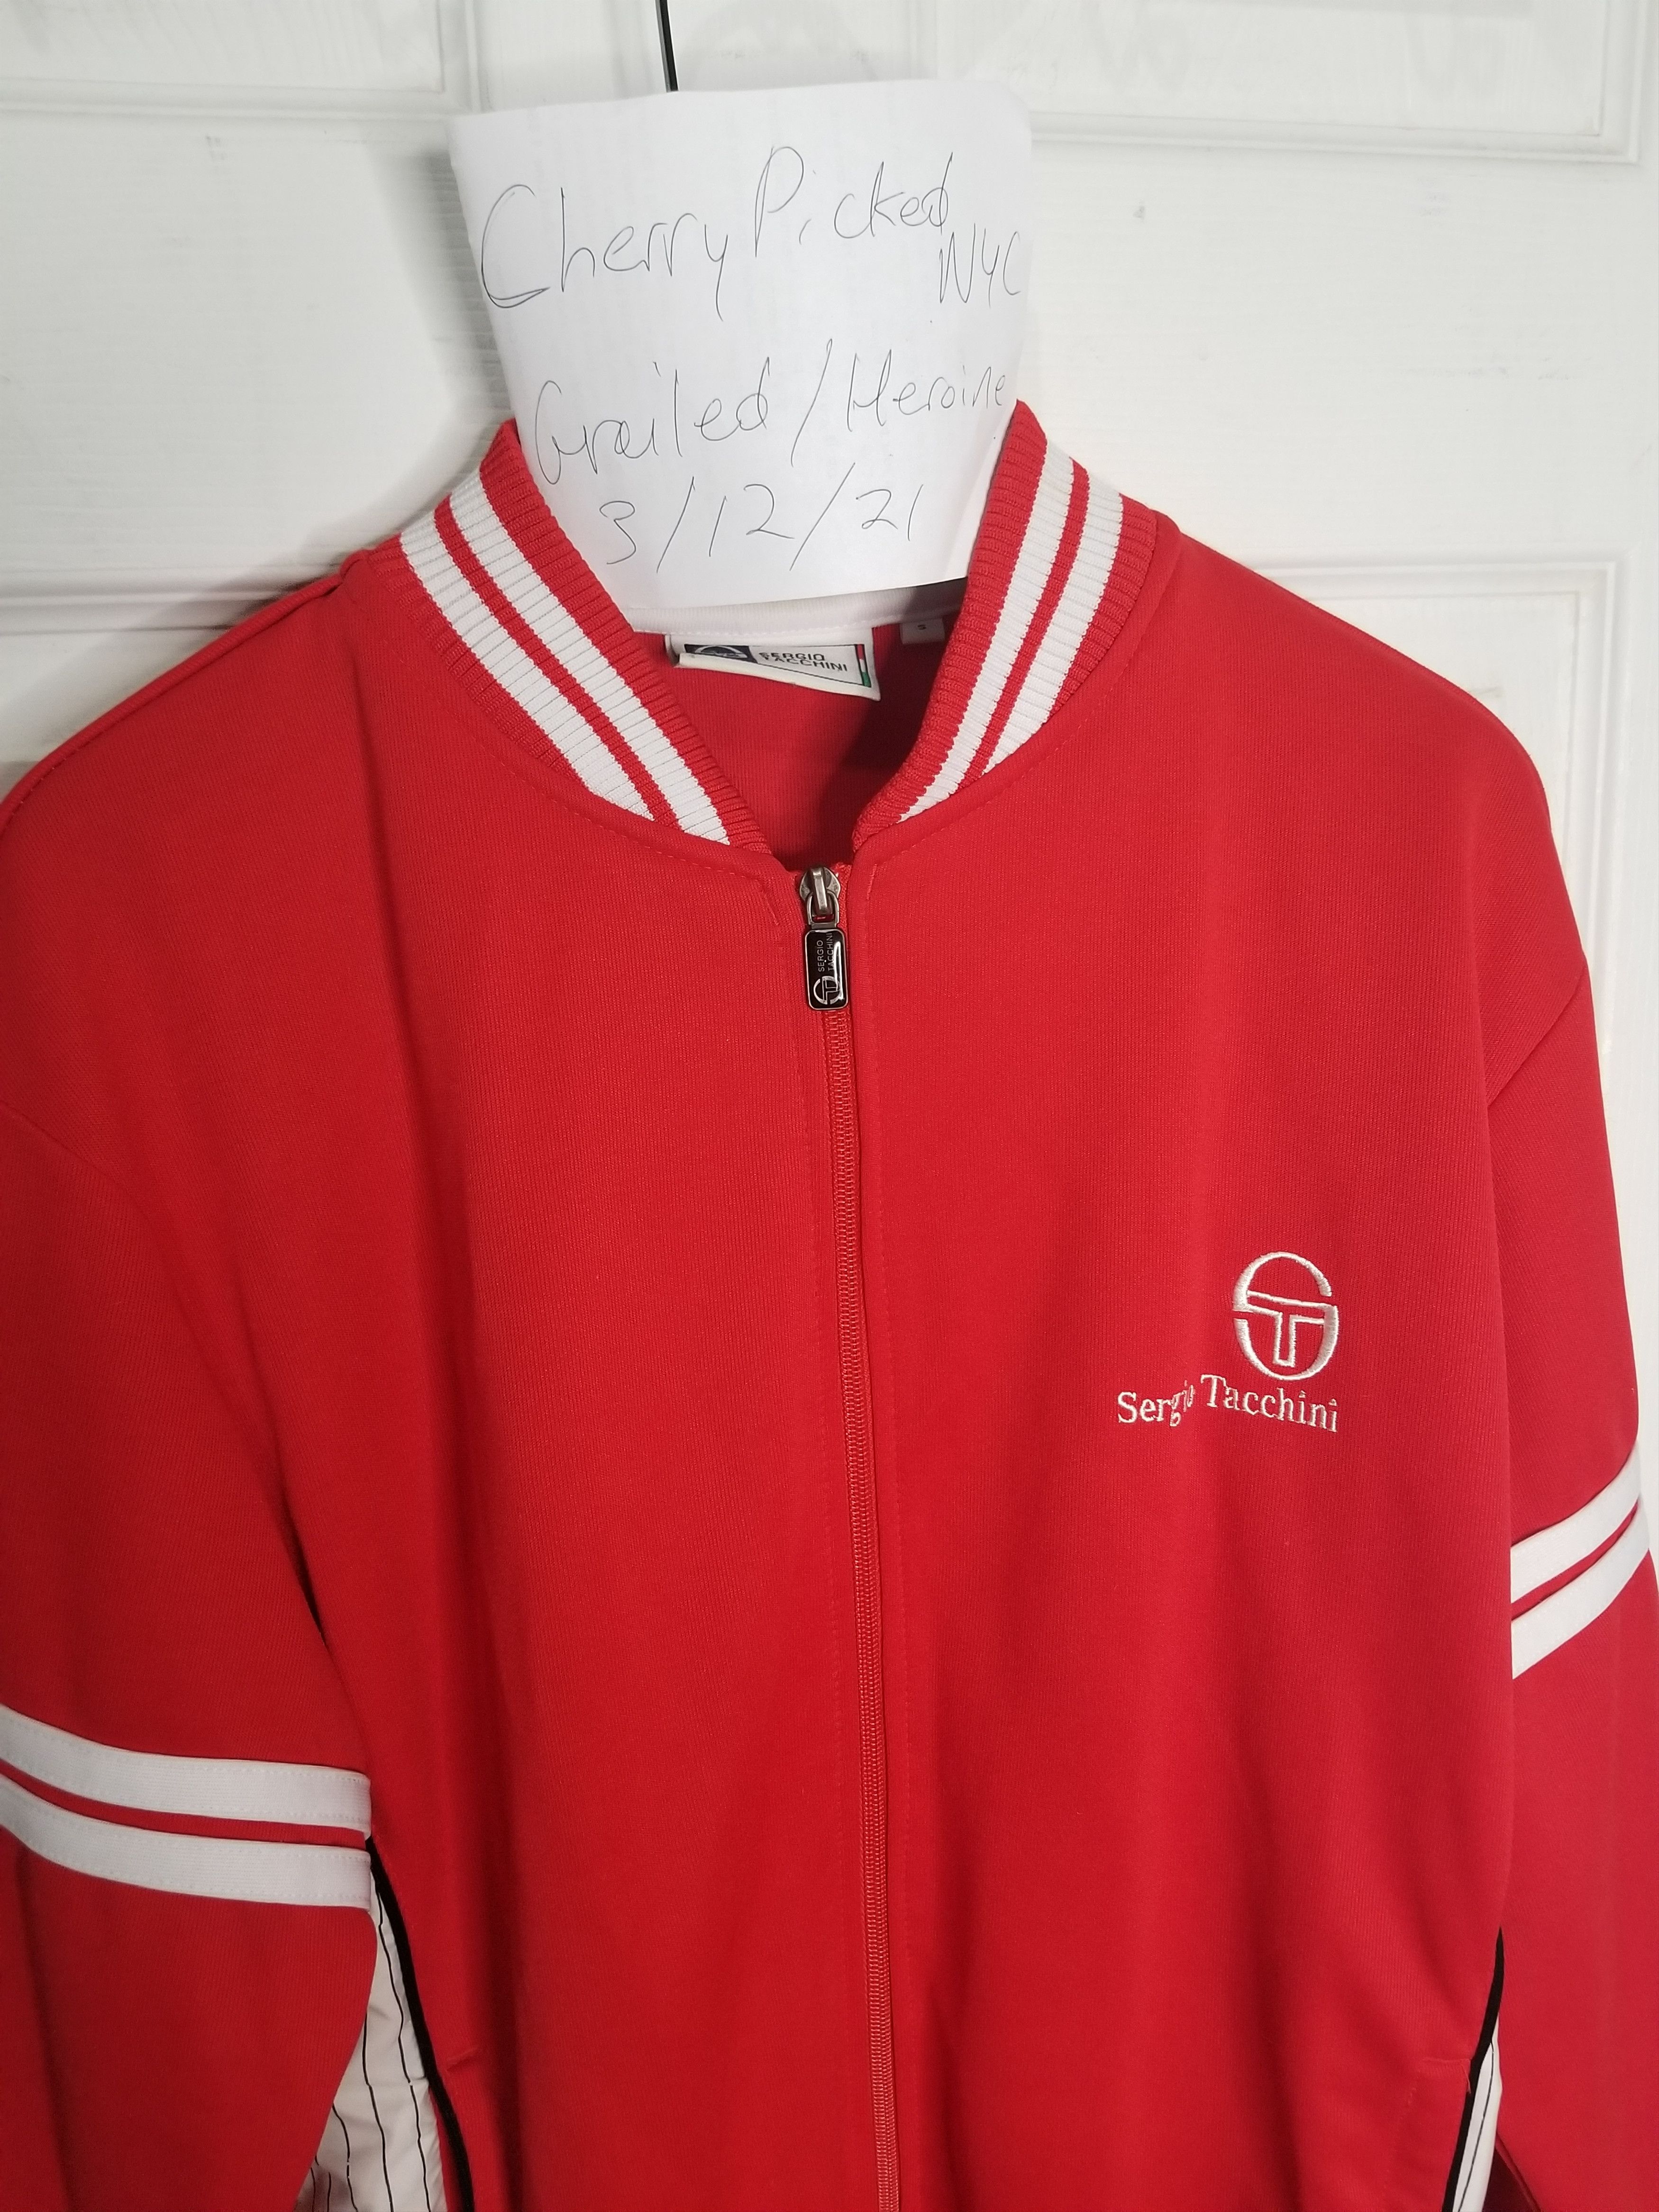 Vintage VTG Sergio Tacchini Embroidered Logo Zip Up Track Jacket Size US S / EU 44-46 / 1 - 10 Preview